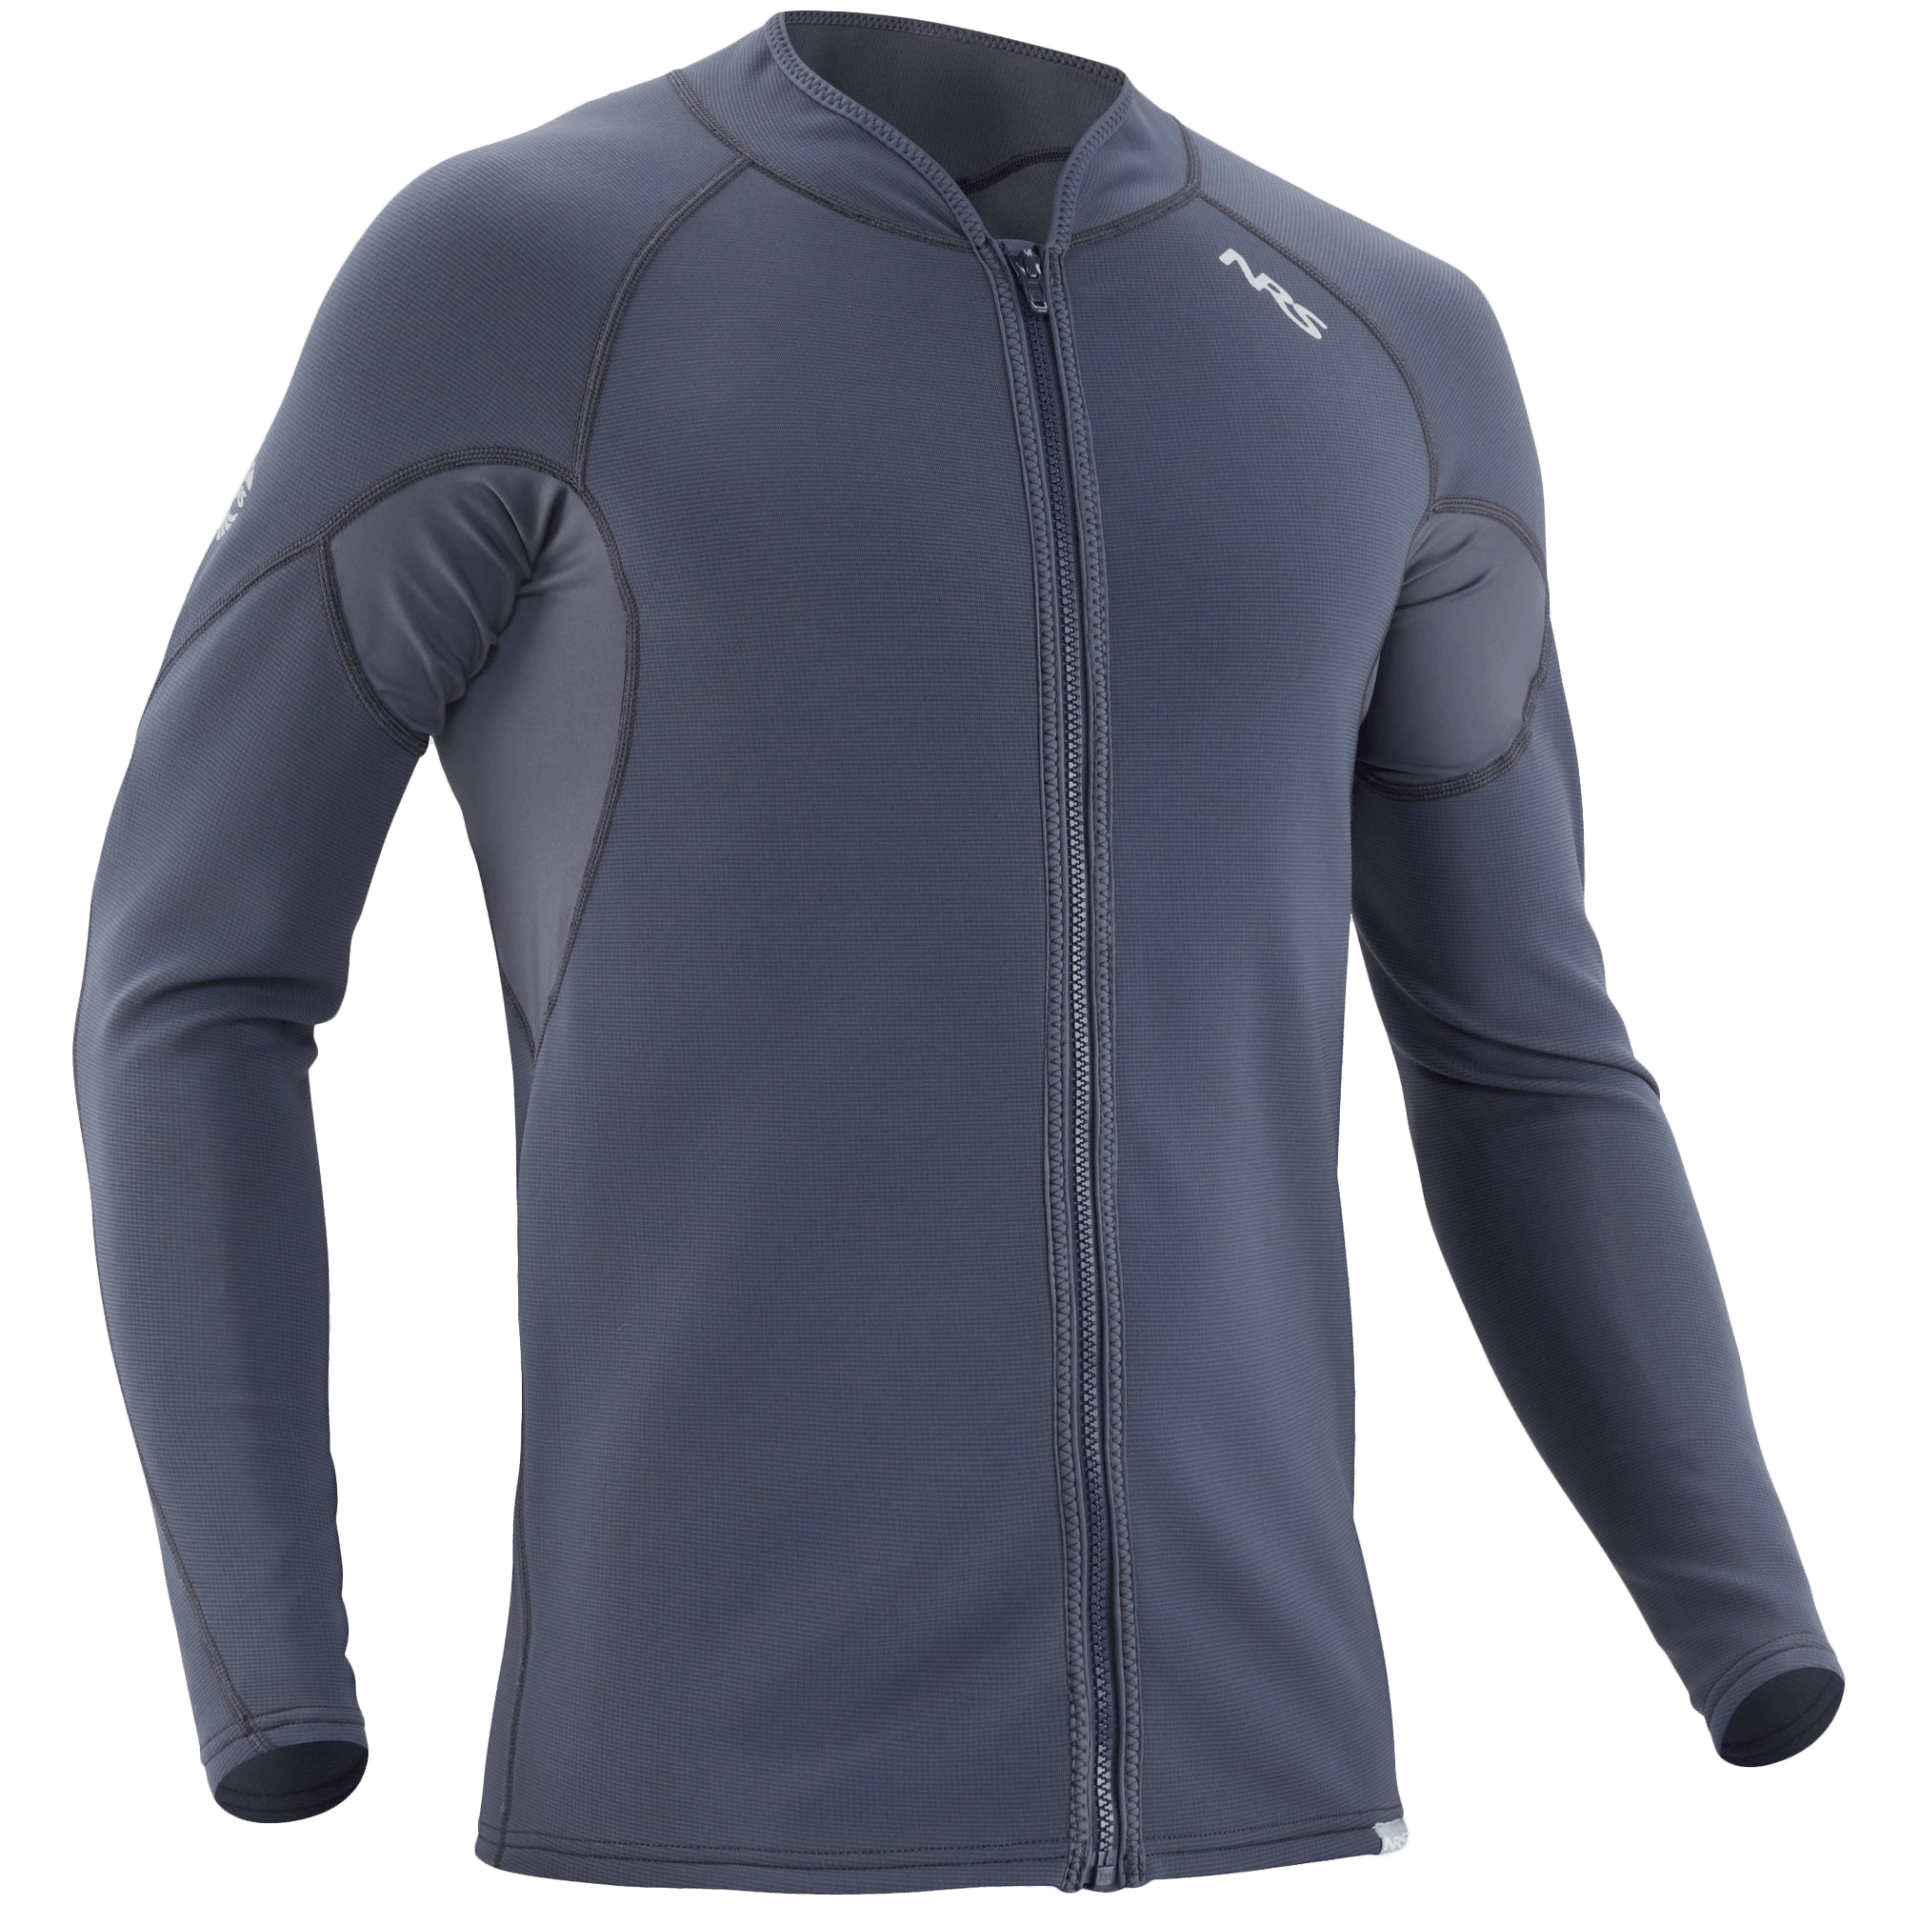 nrs_m_hydroskin_05mm_jacket_right_angle.png